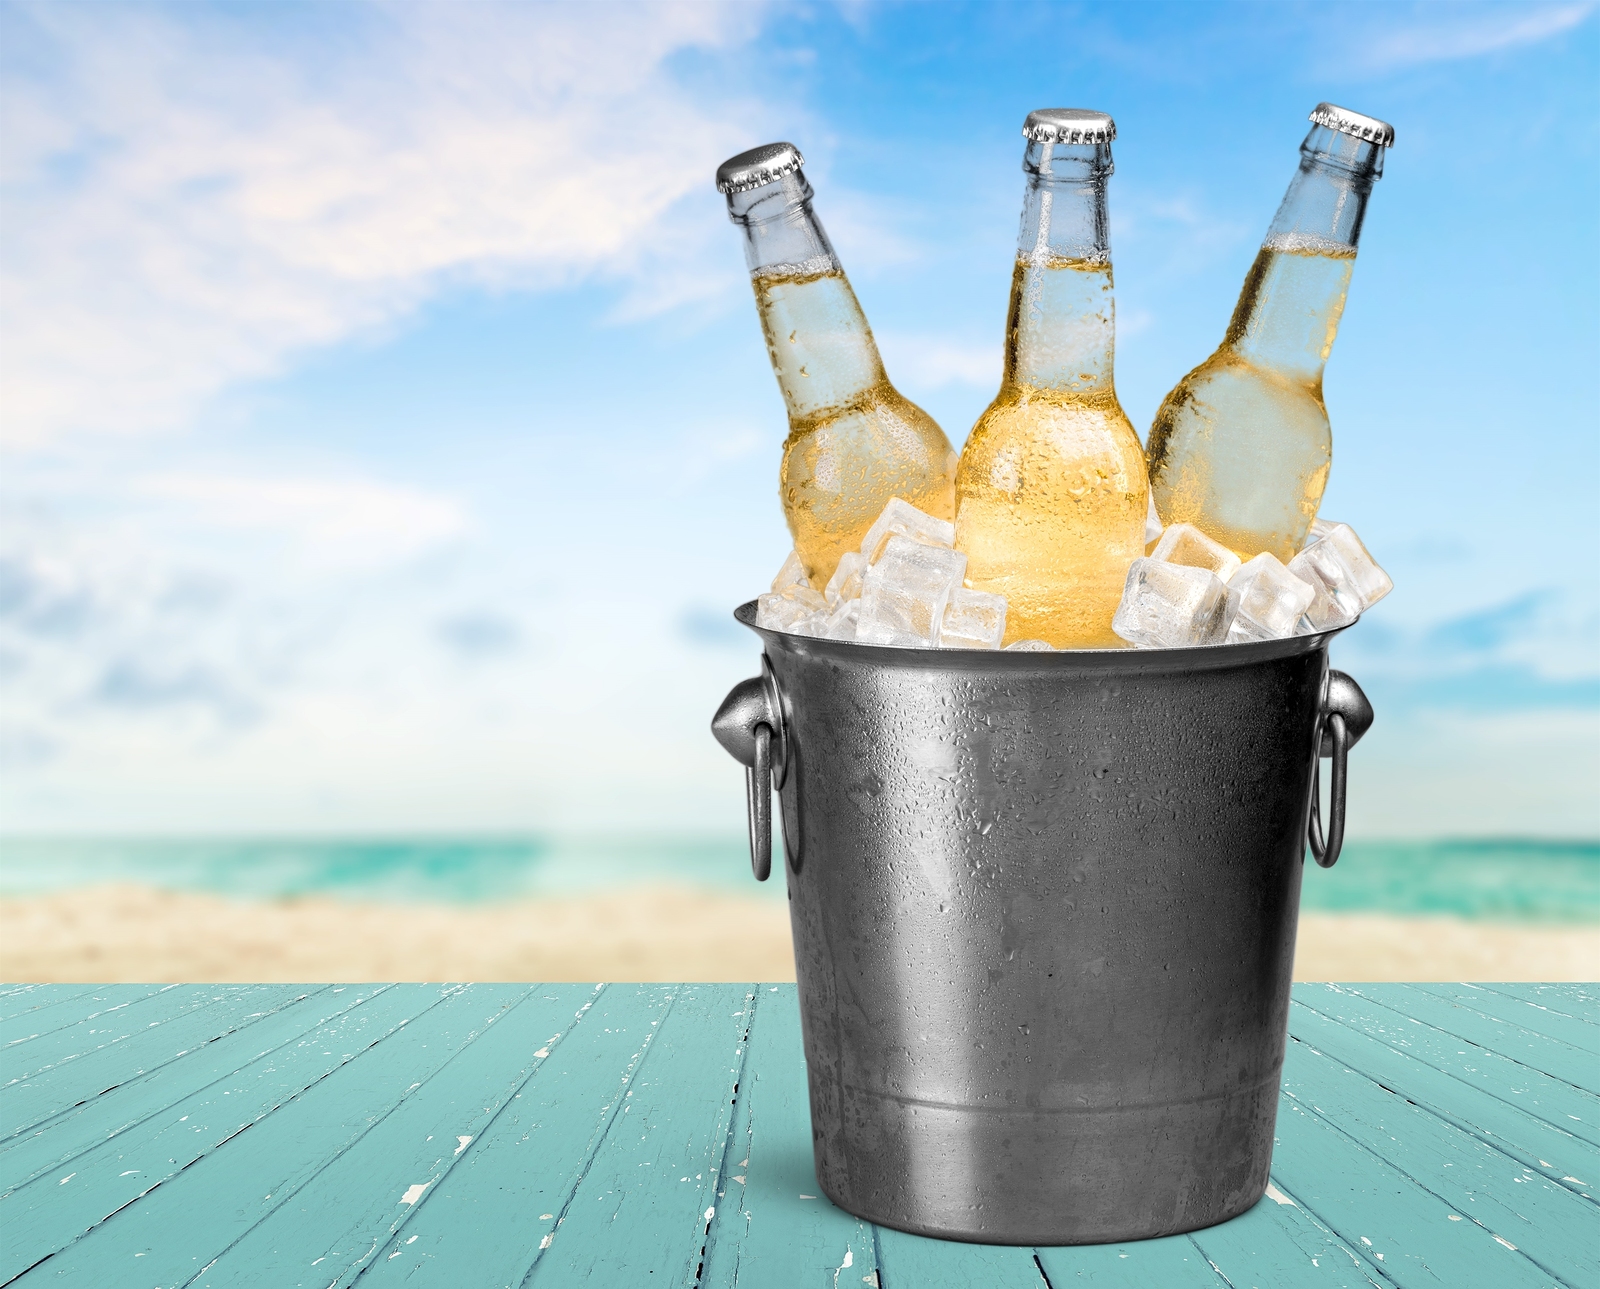 a bucket of beer with ice on a blue surface